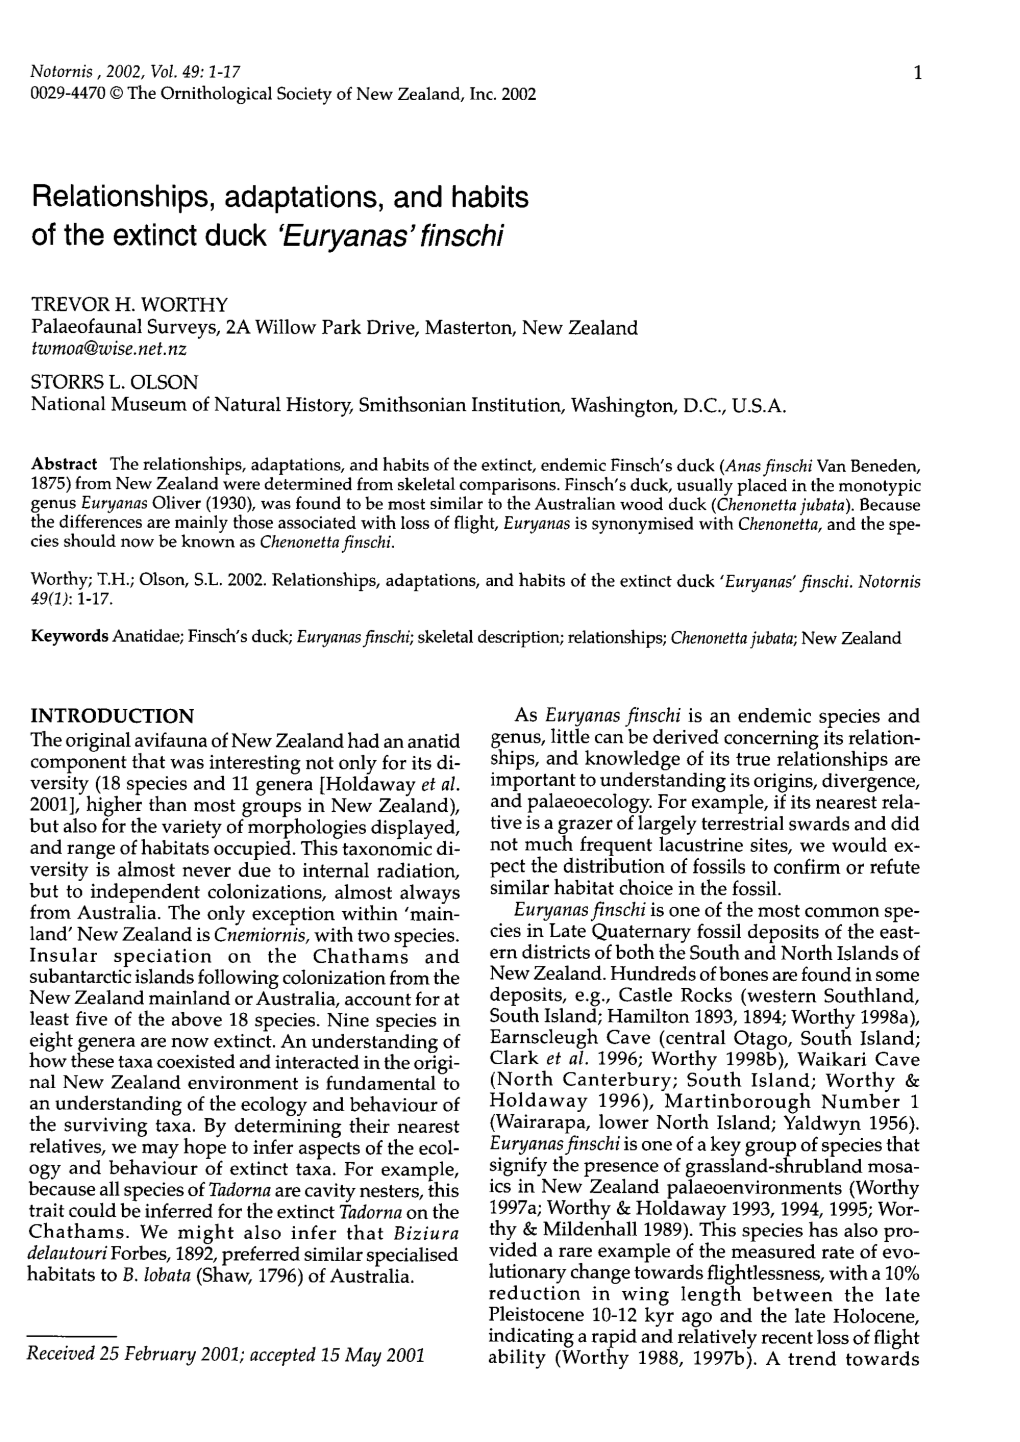 Relationships, Adaptations, and Habits of the Extinct Duck 'Euryanas'finschi